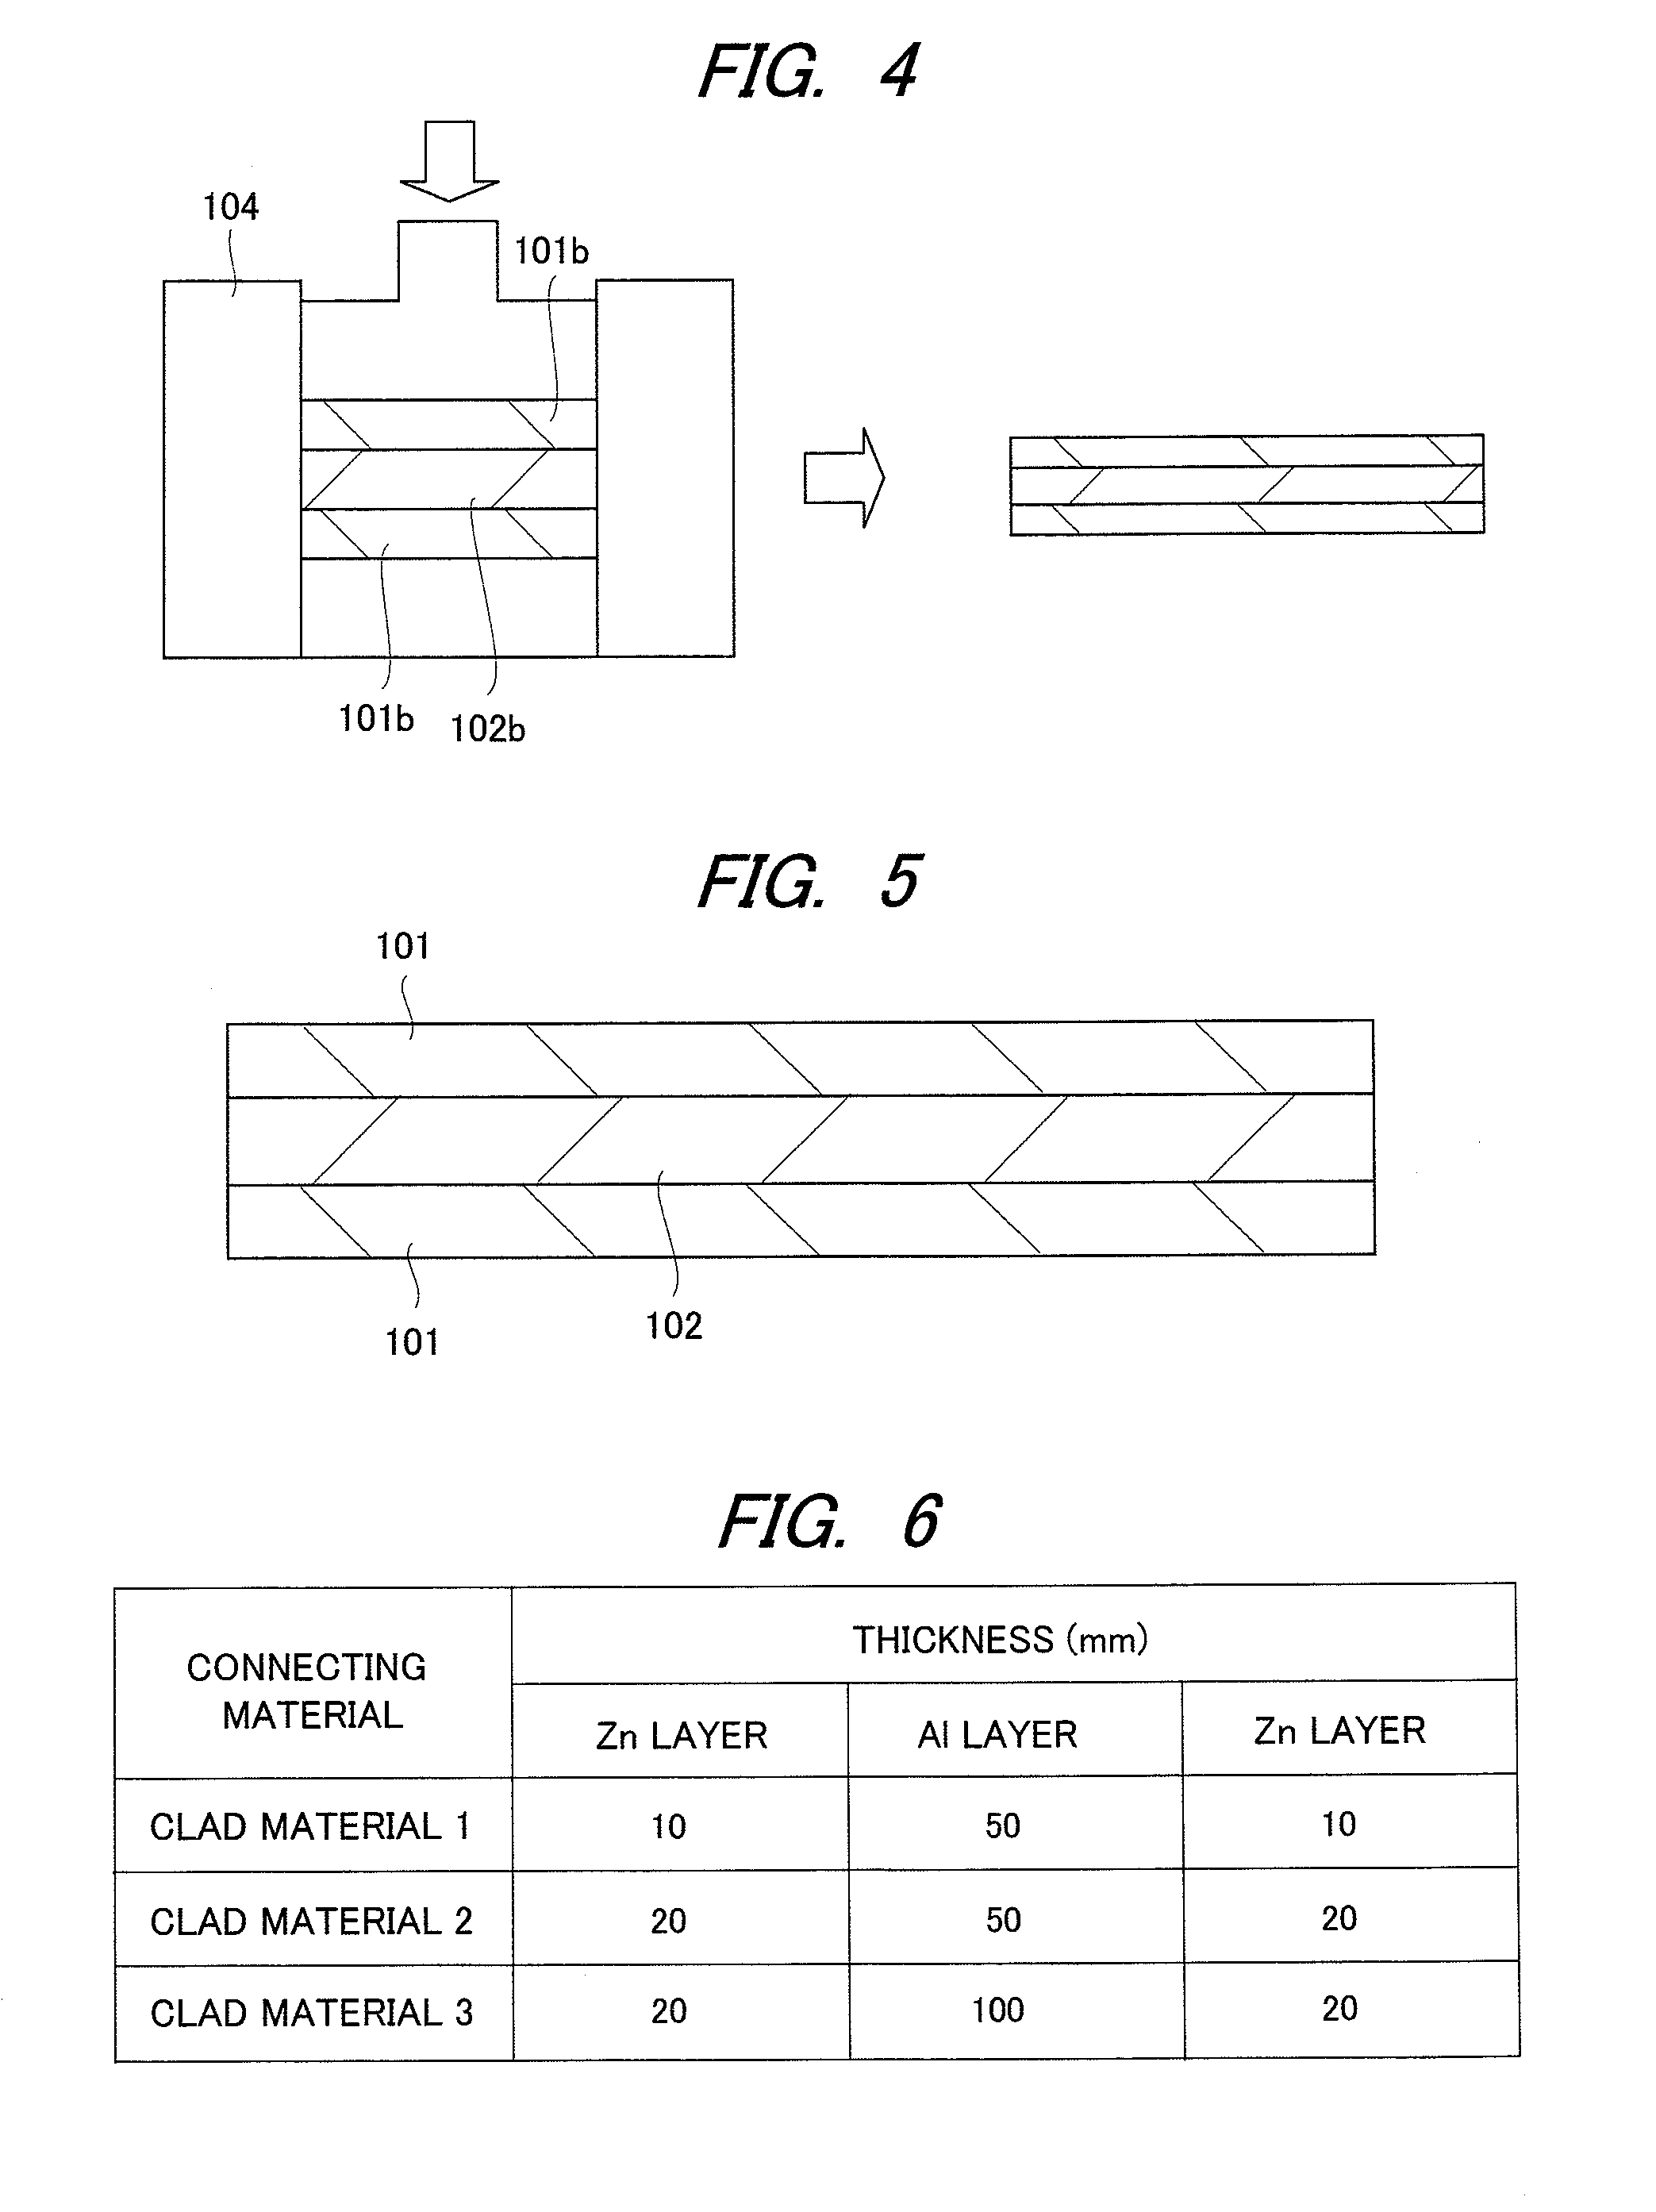 Connecting material, method for manufacturing connecting material, and semiconductor device